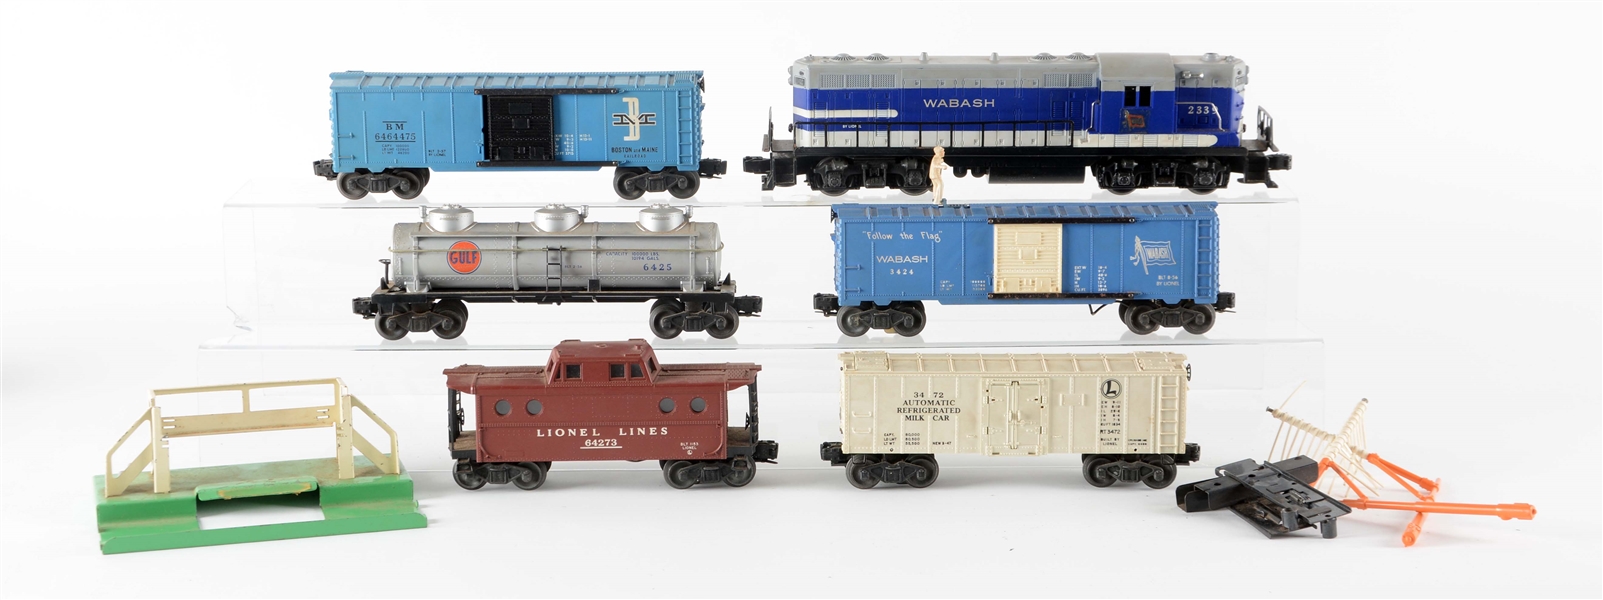 LOT OF 7: LIONEL TRAINS IN BOXES. 